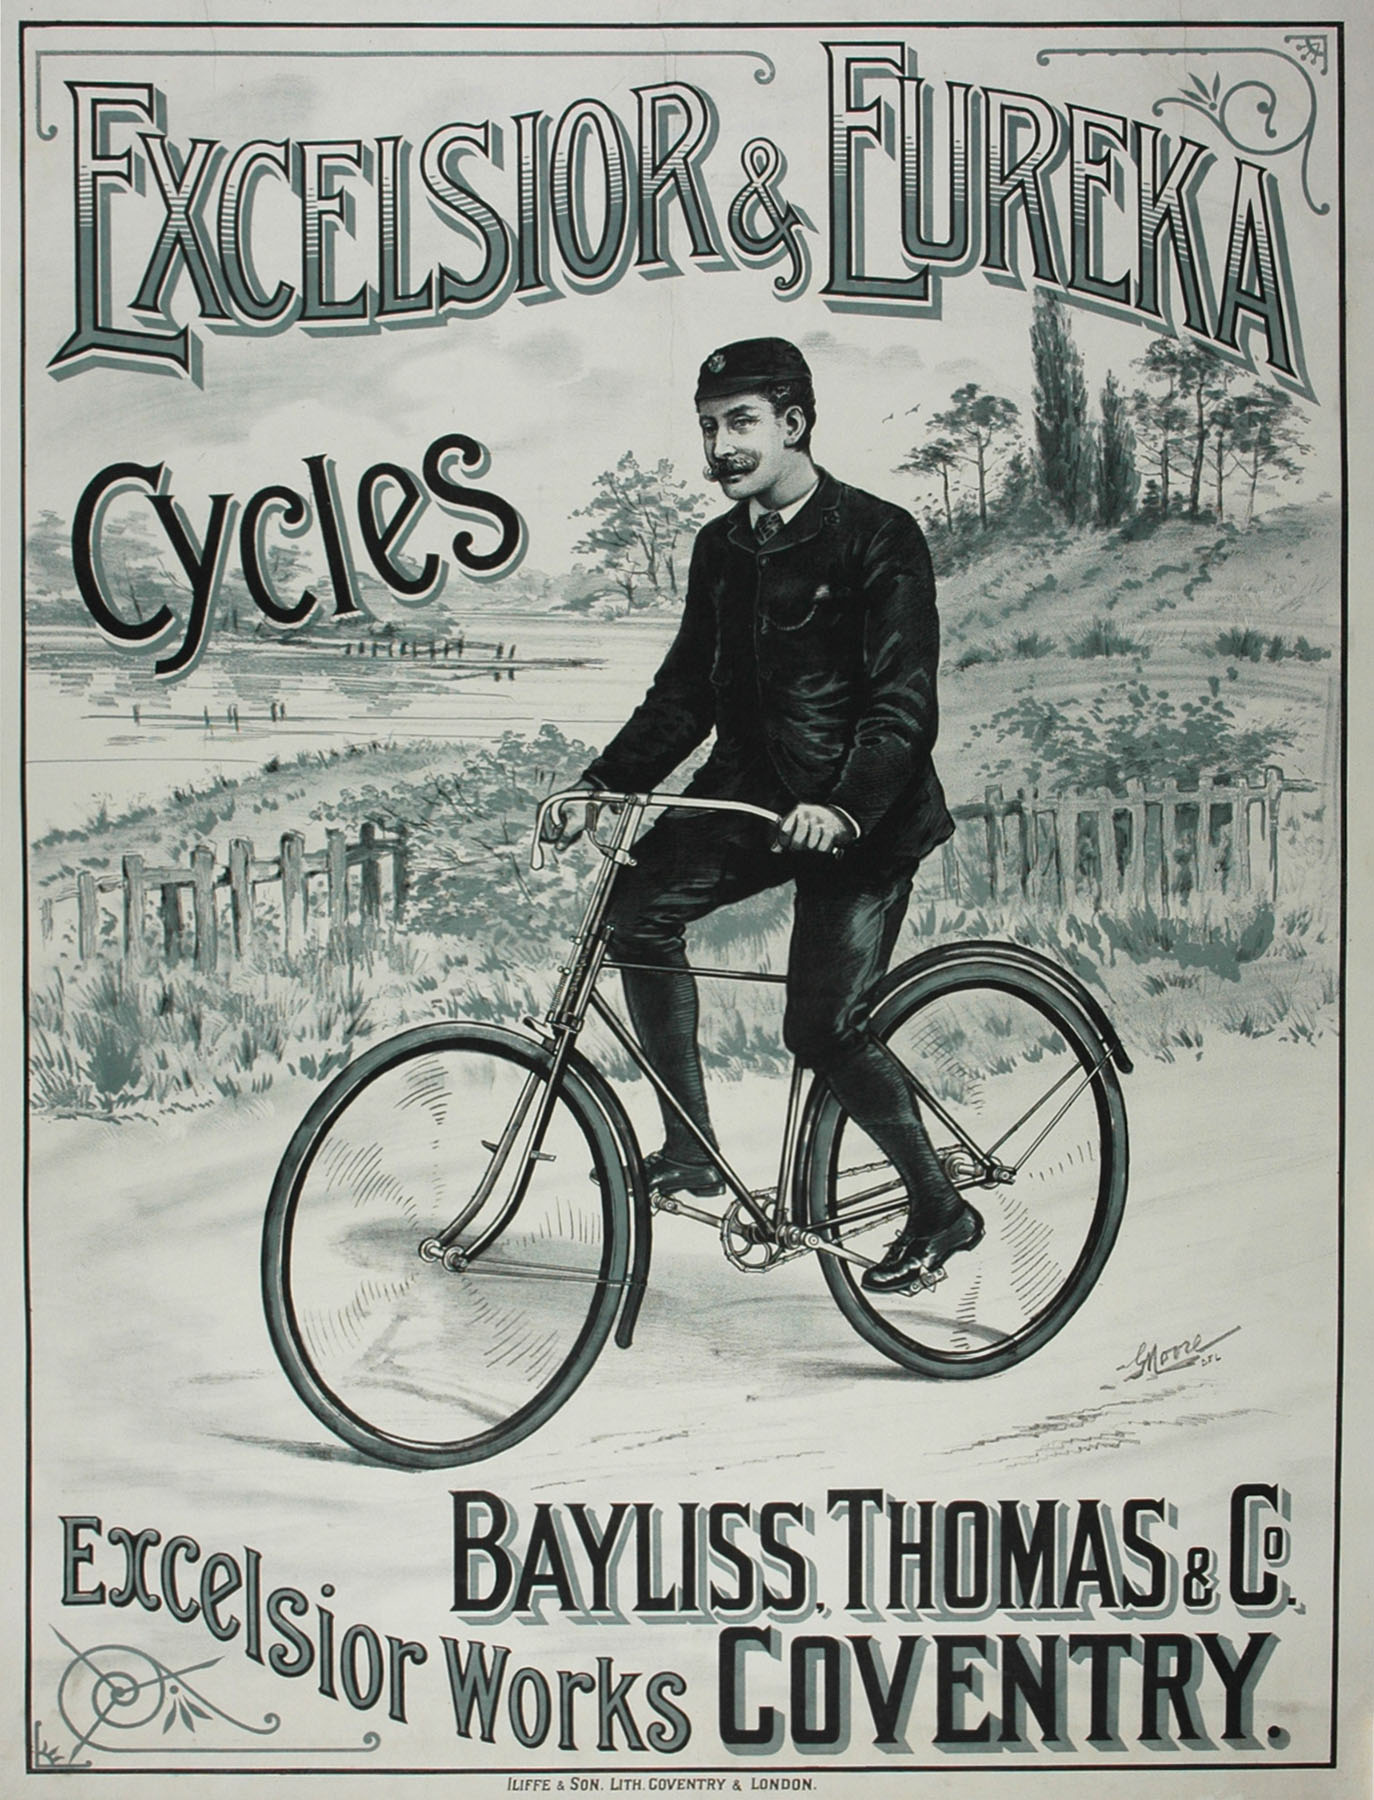 Excelsior & Eureka Cycles